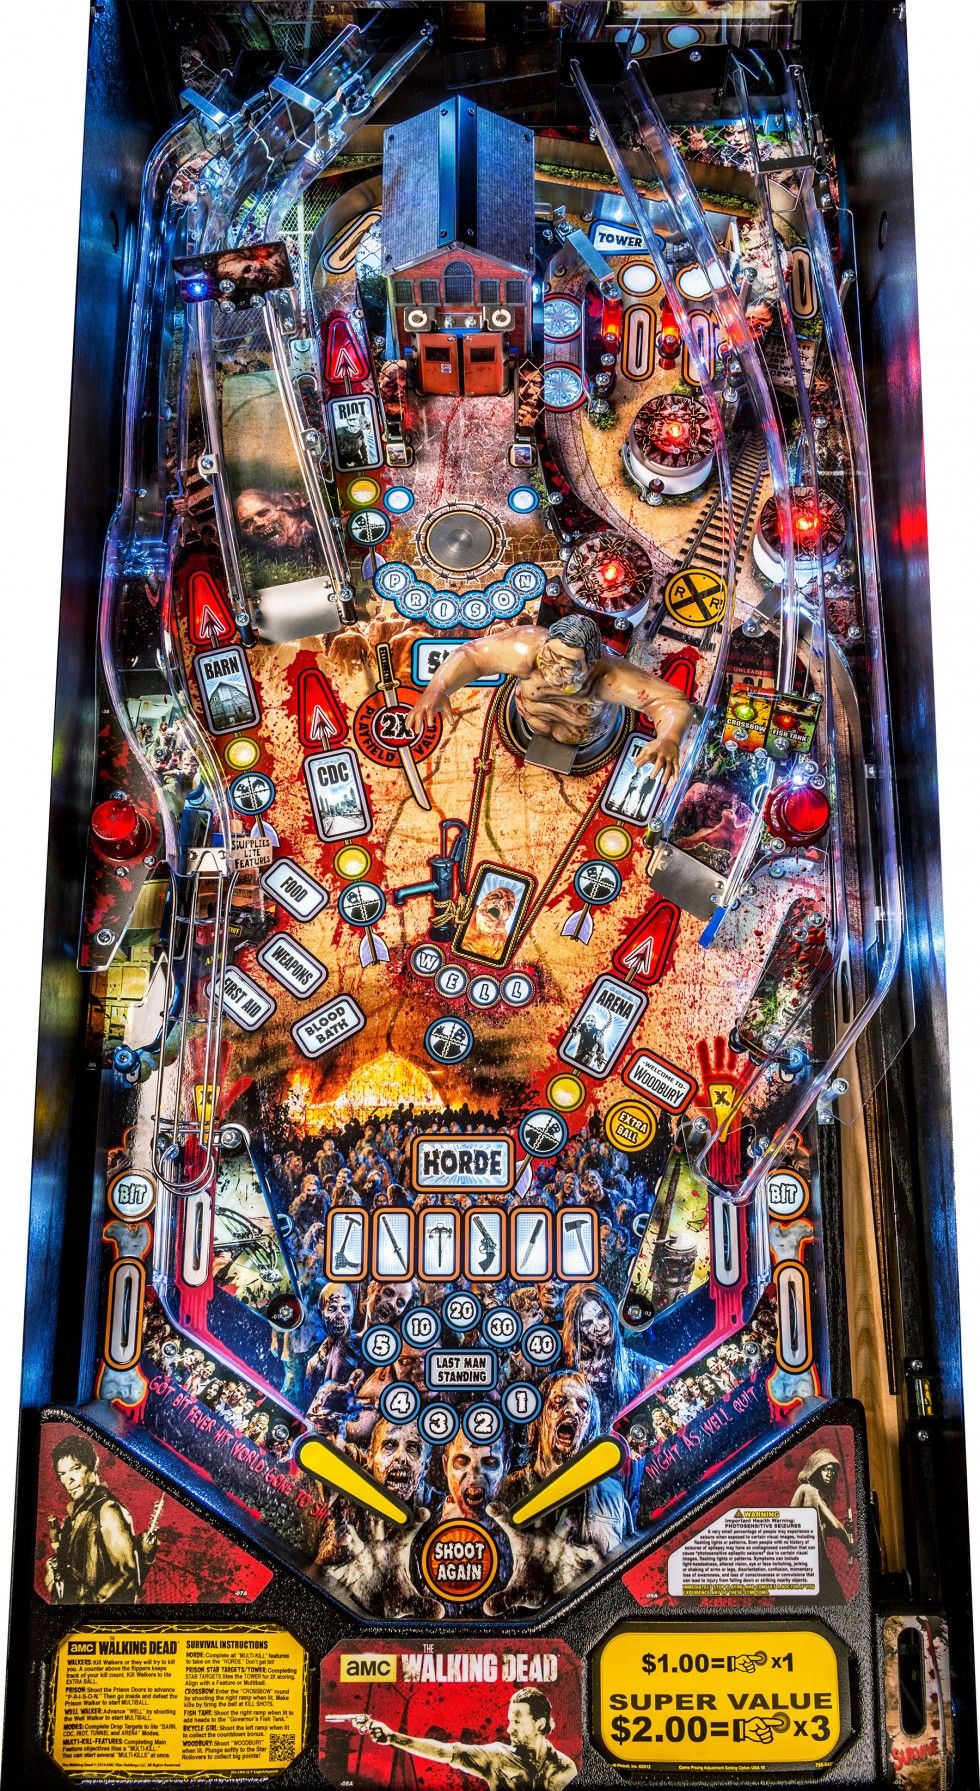 Play pinball for free